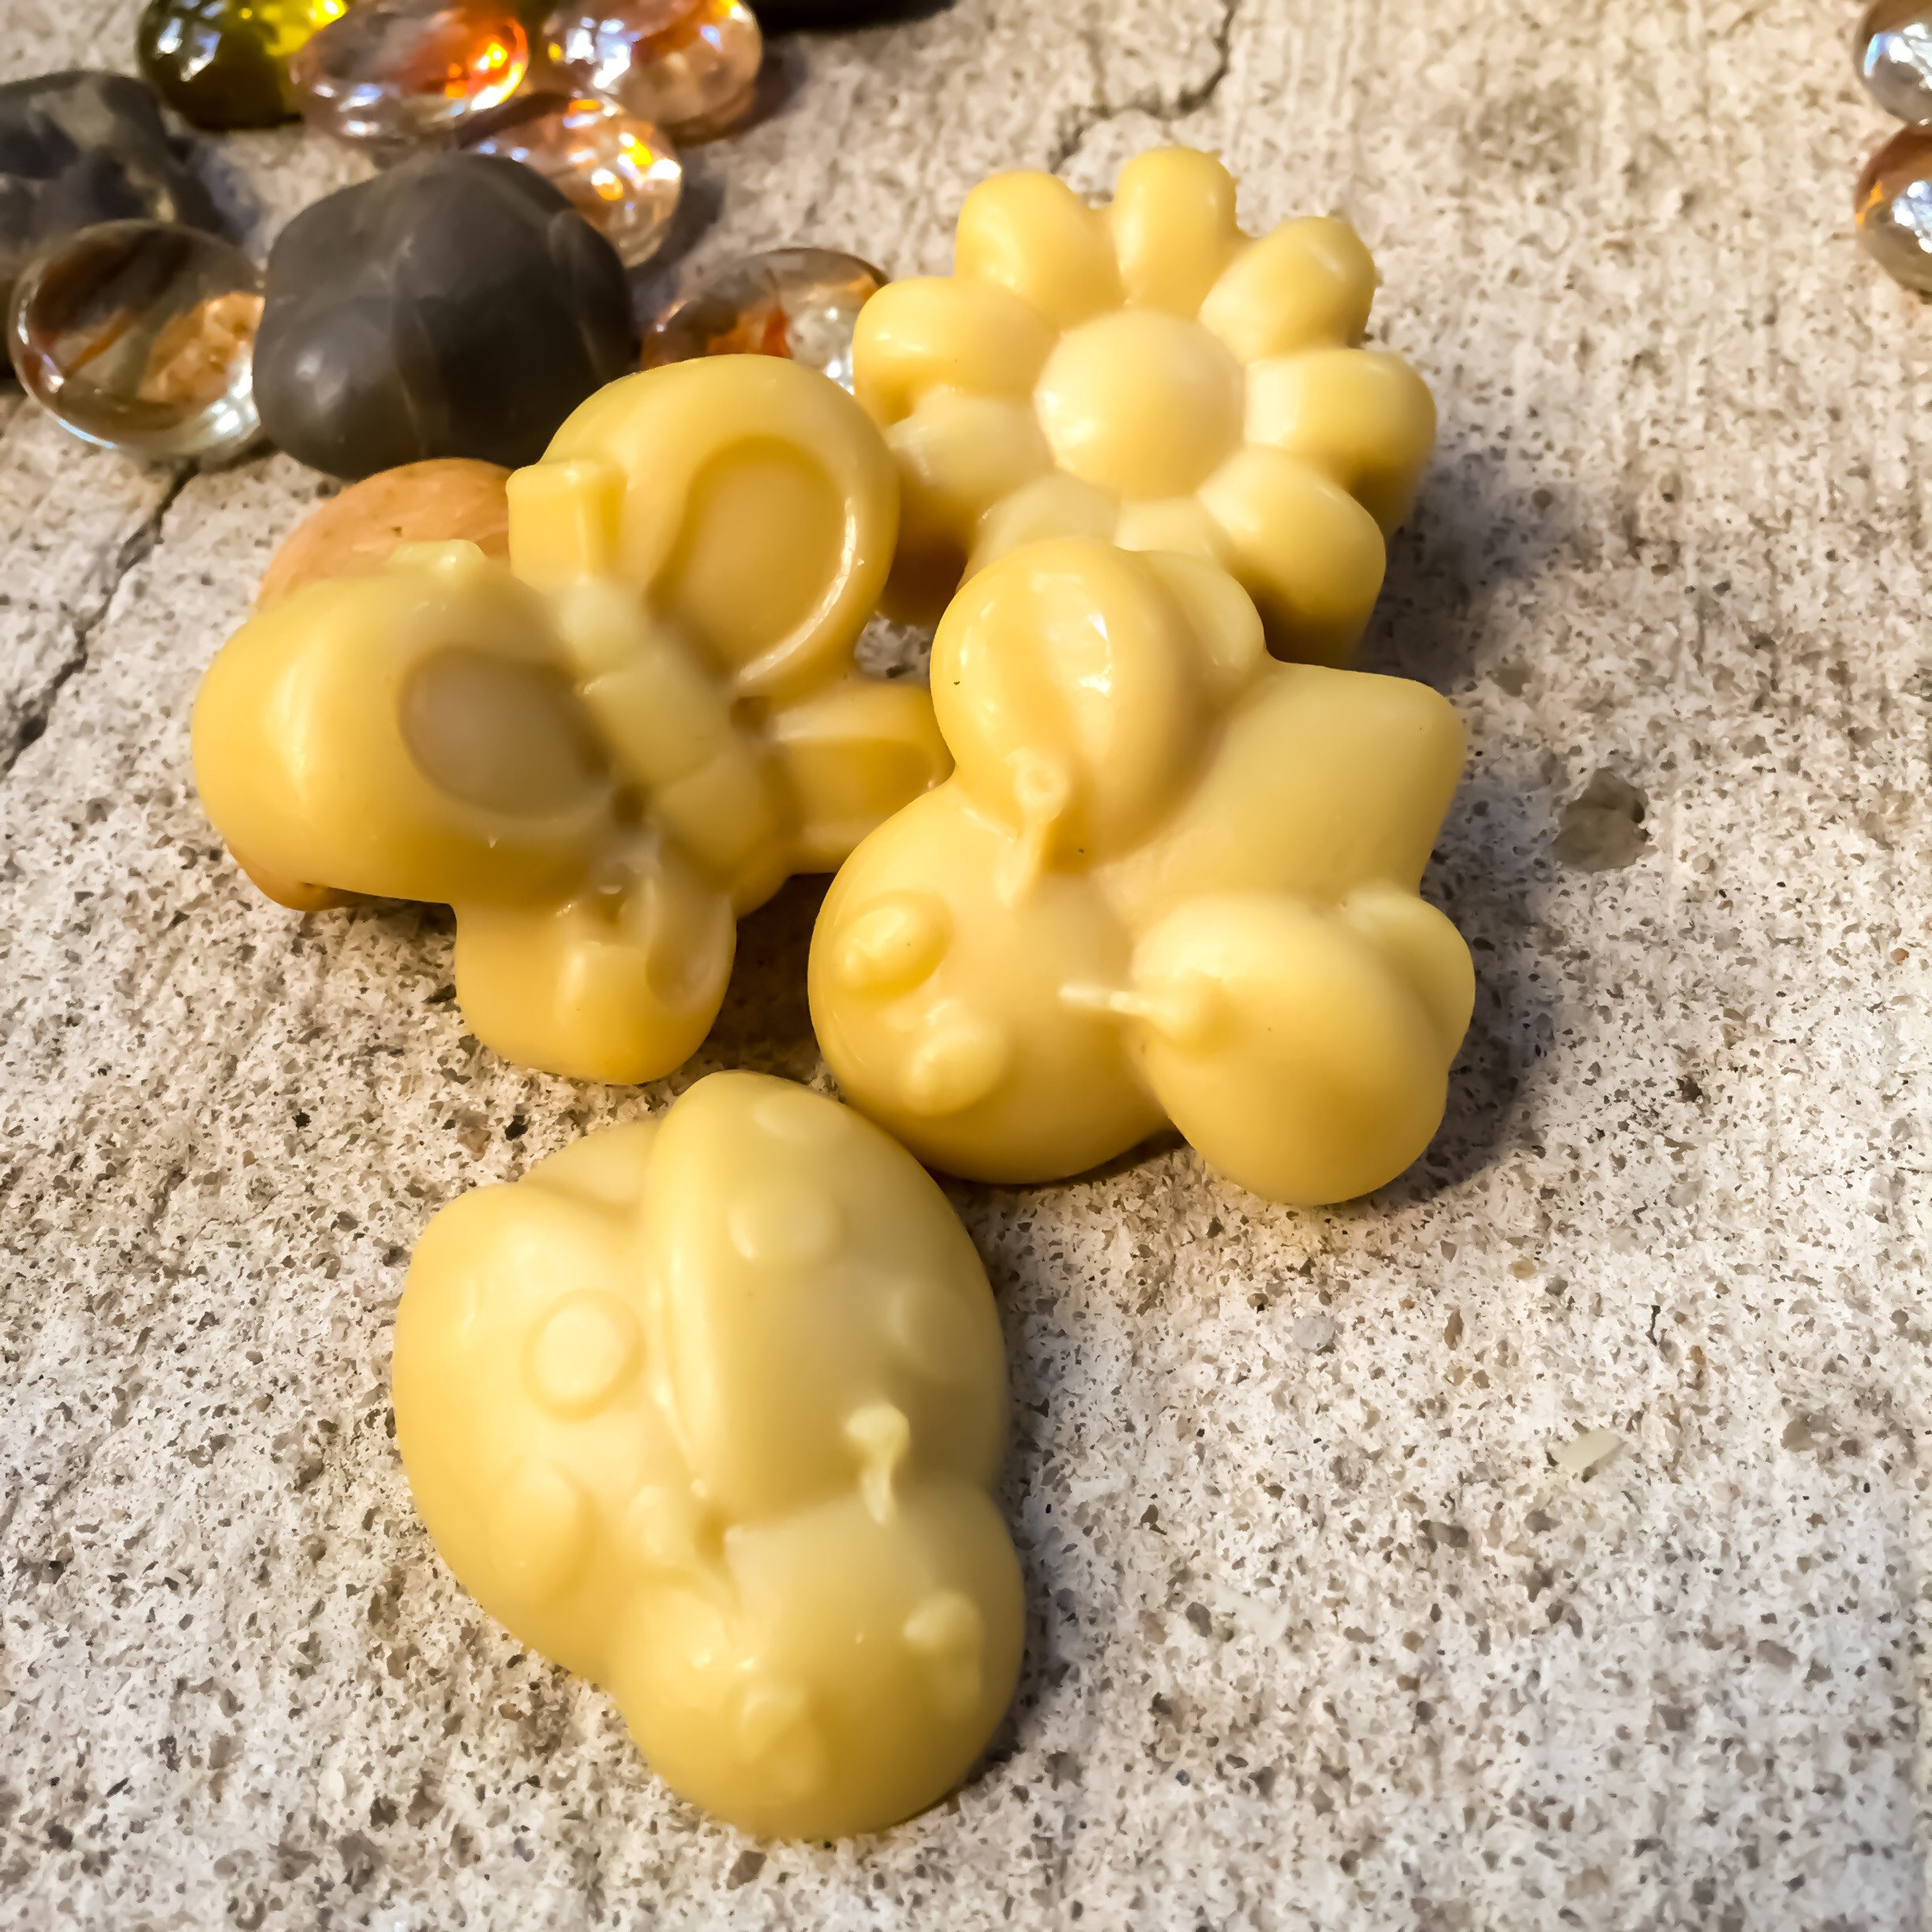 Pure organic Beeswax melts made with local Georgia beeswax in a variety of  scents-natural scents-holiday scents-holiday scented beeswax melt